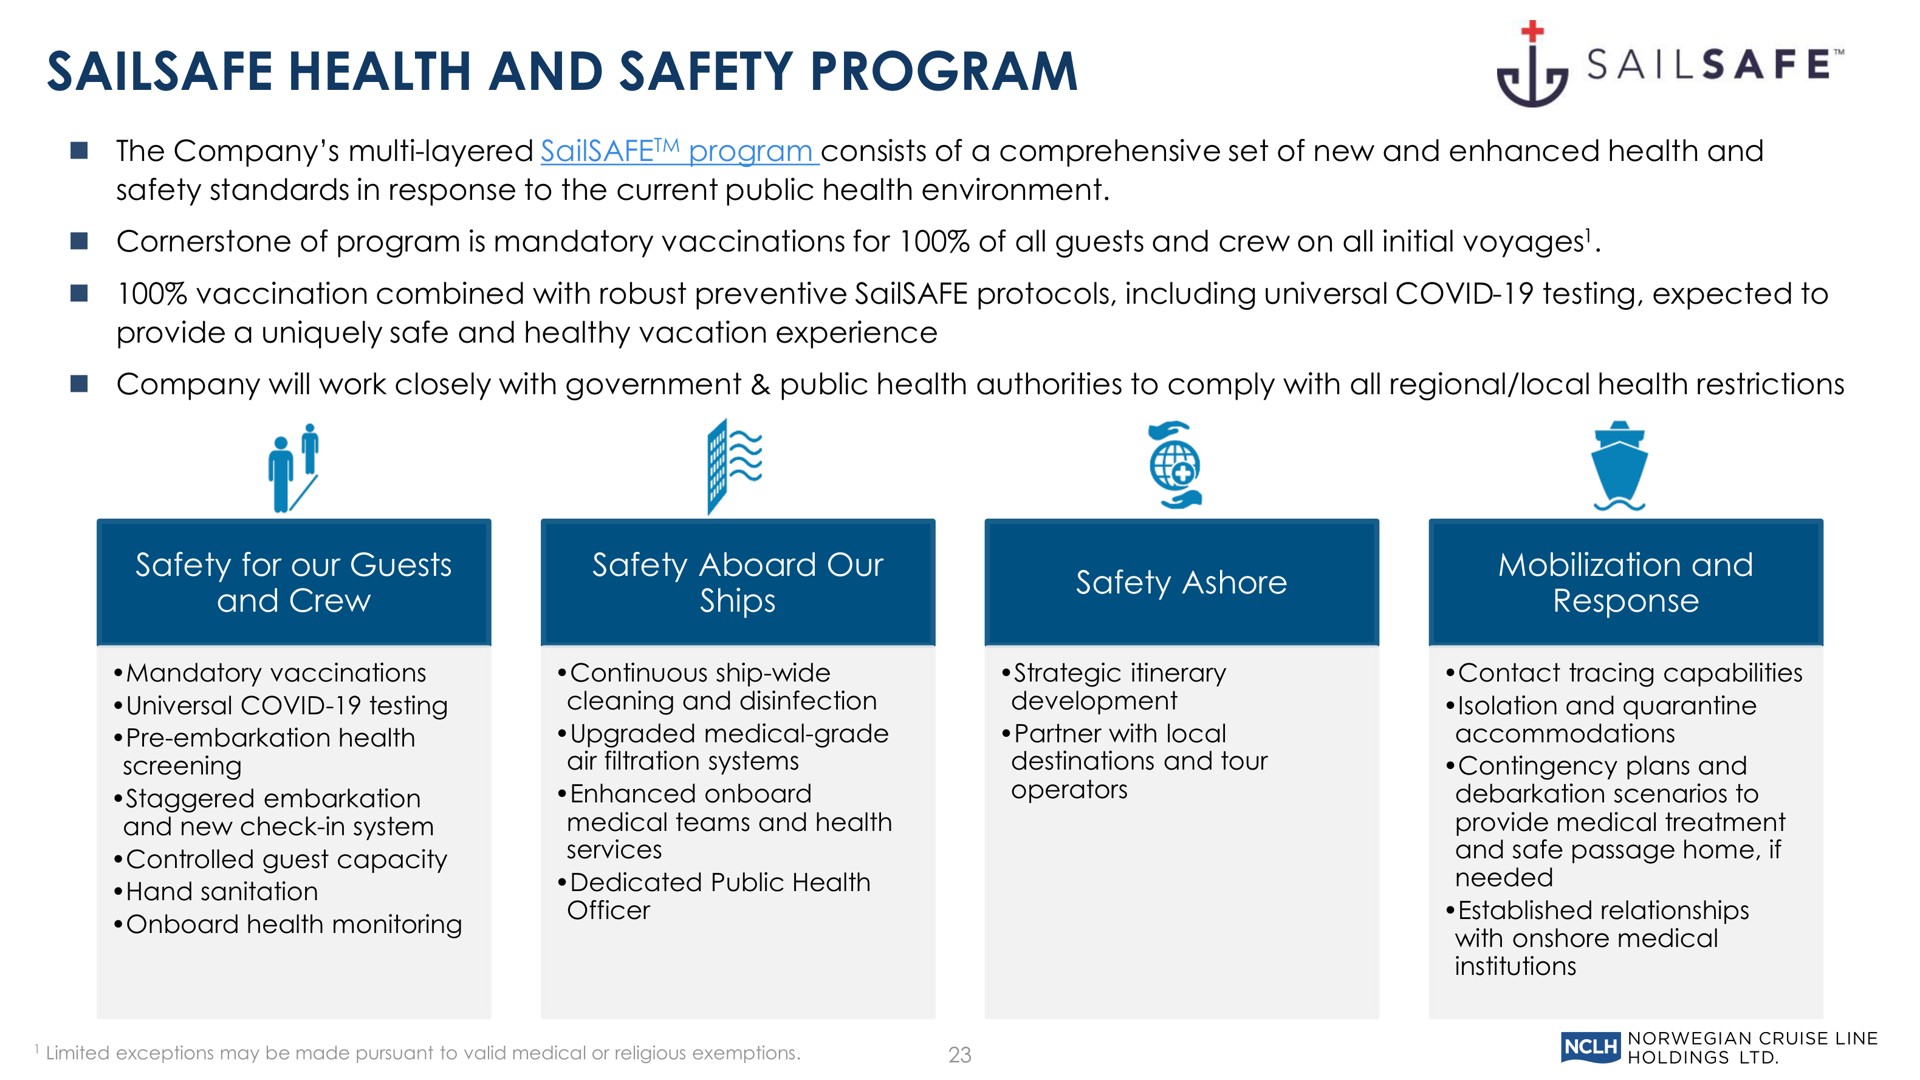 health and safety program | Norwegian Cruise Line